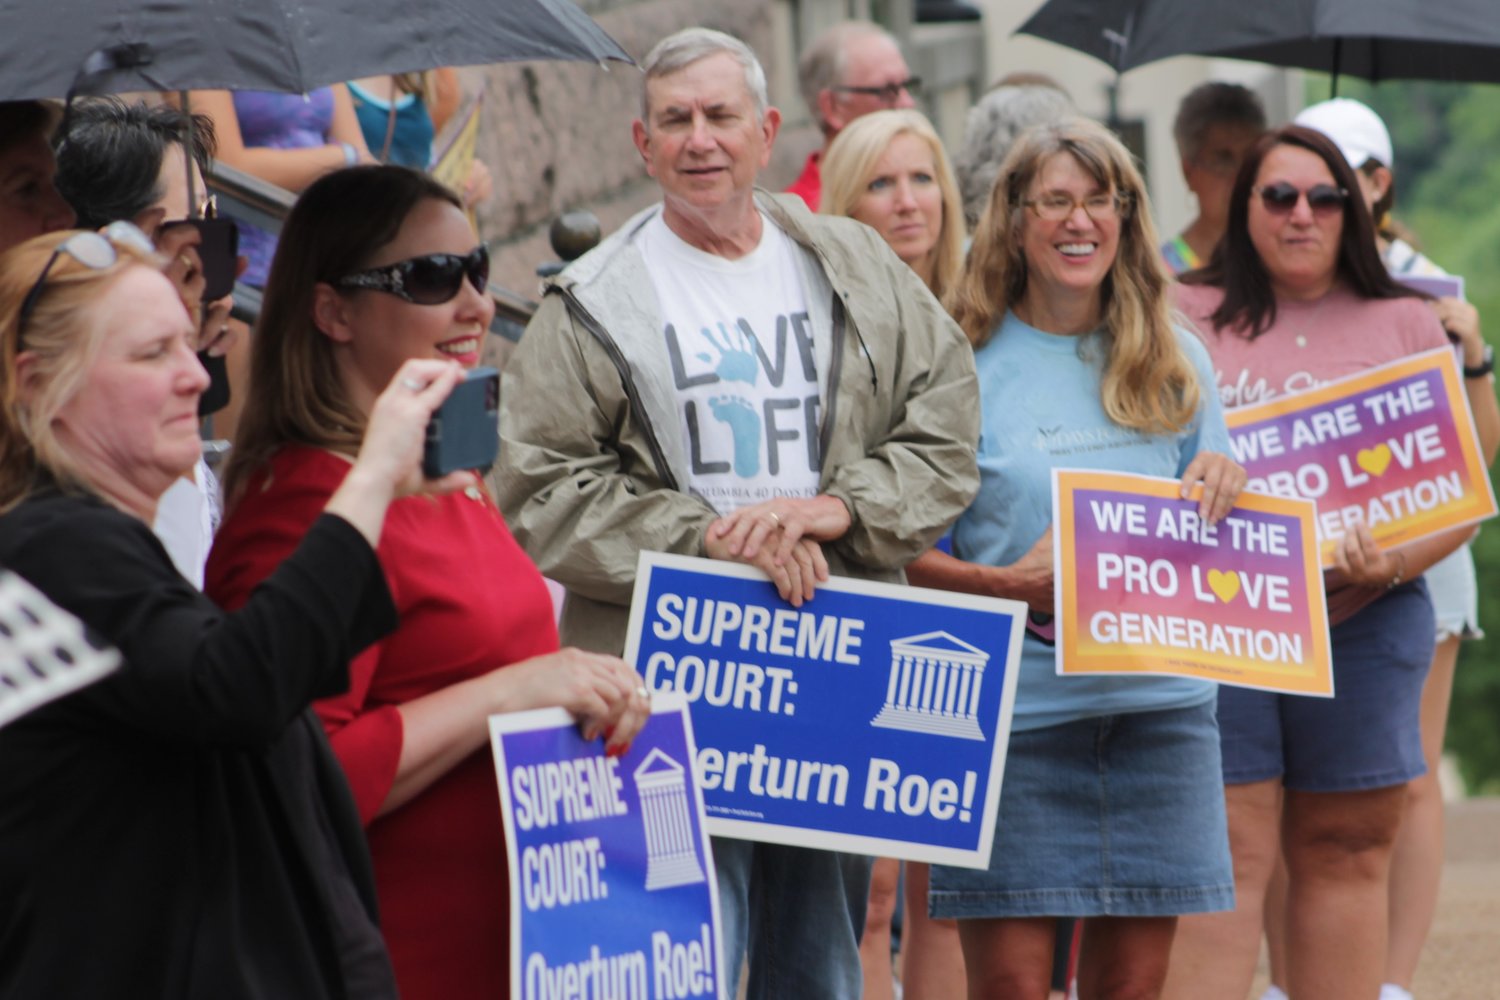 People gather outside the Missouri Supreme Court Building in Jefferson City in a Decision Day Rally on June 24, the day the U.S. Supreme Court overturned the 1973 decision that legalized abortion-on-demand throughout the country.